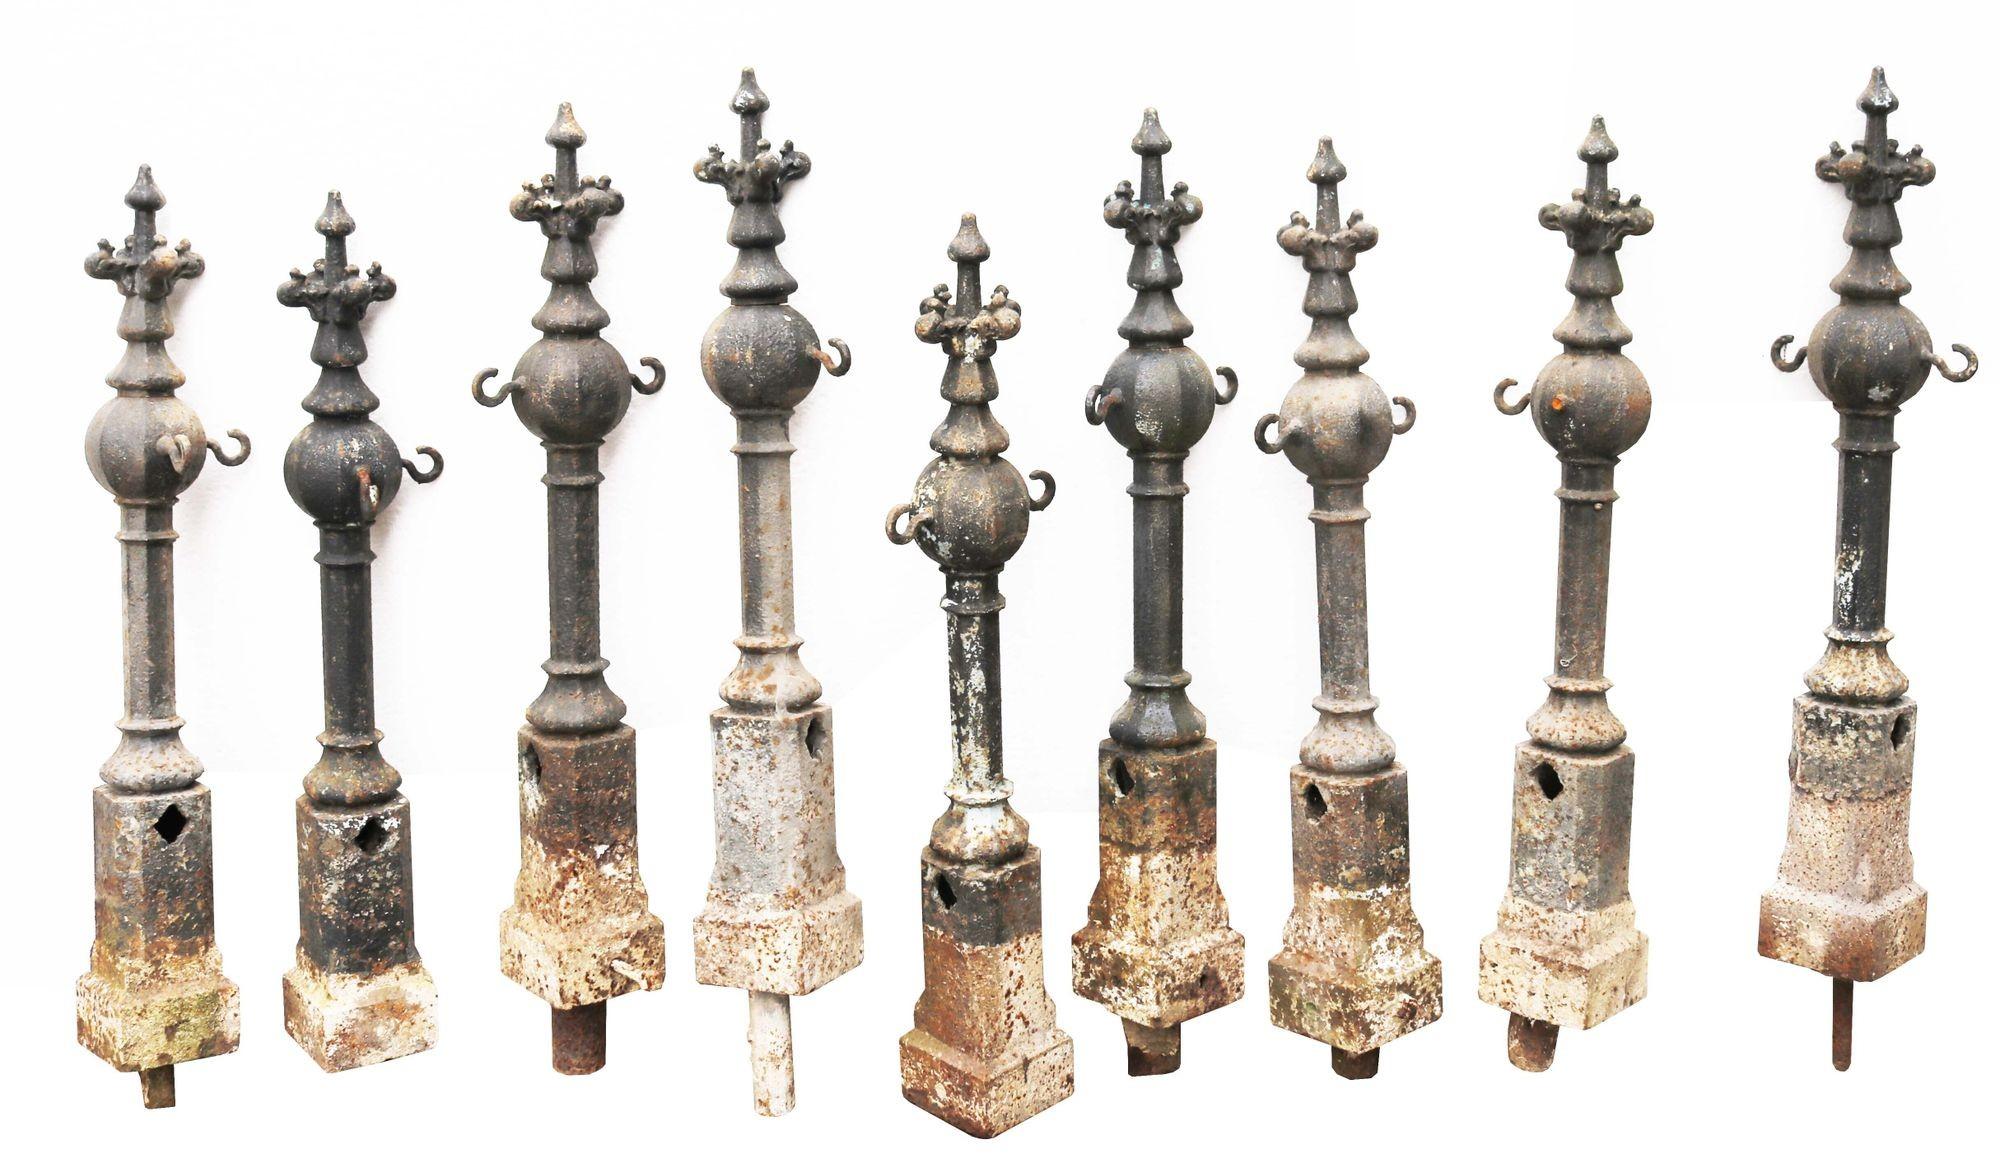 Set of 10 Antique Driveway bollards. Wonderfully weathered set of ten bollards. The bollards are robust in design and integrity. They are designed for up to 93 cm above ground. They are intended to have chain hung between them.